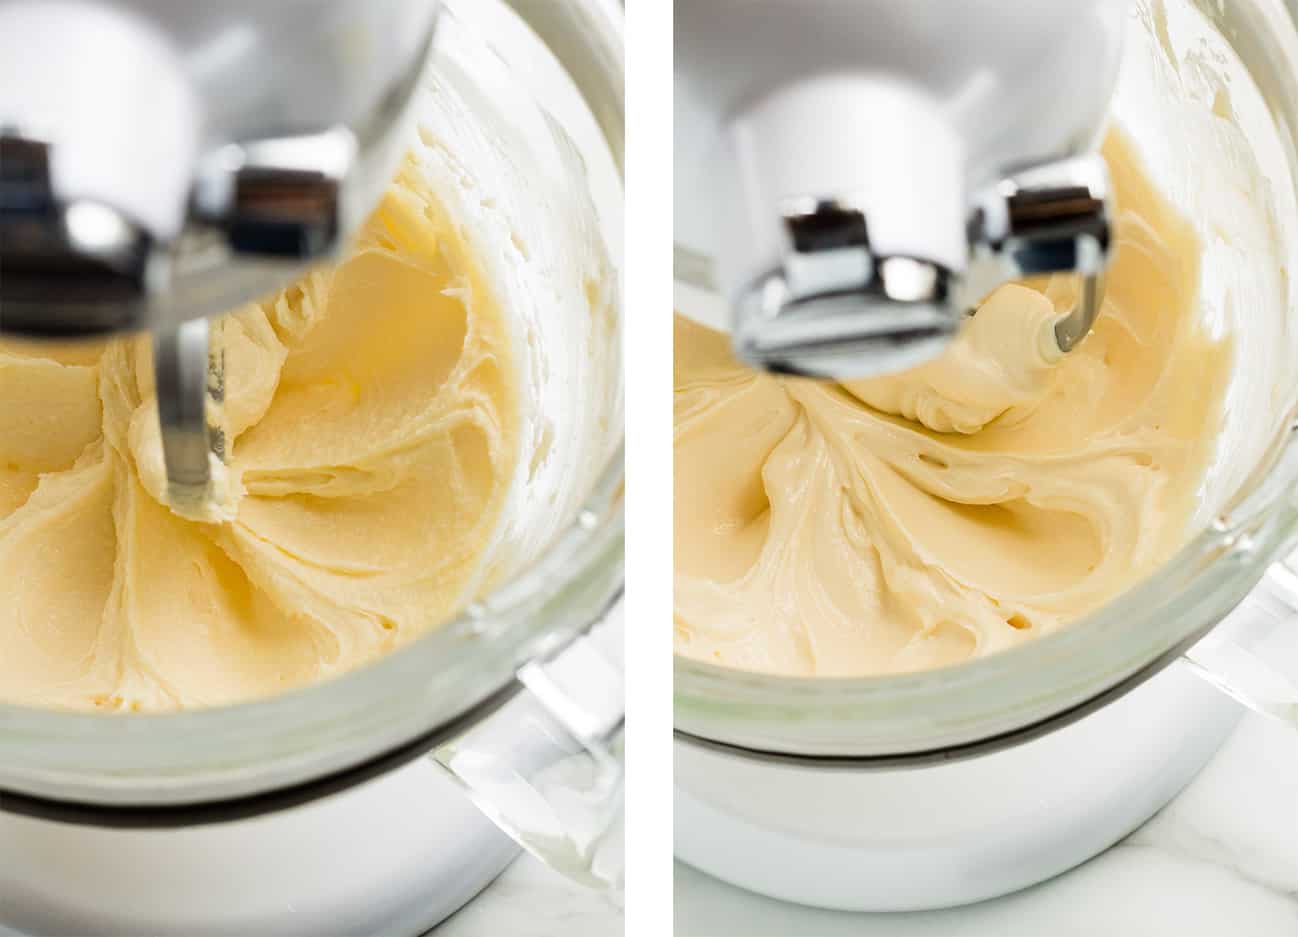 Creaming vegan butter, sugar, and aquafaba in a stand mixer.